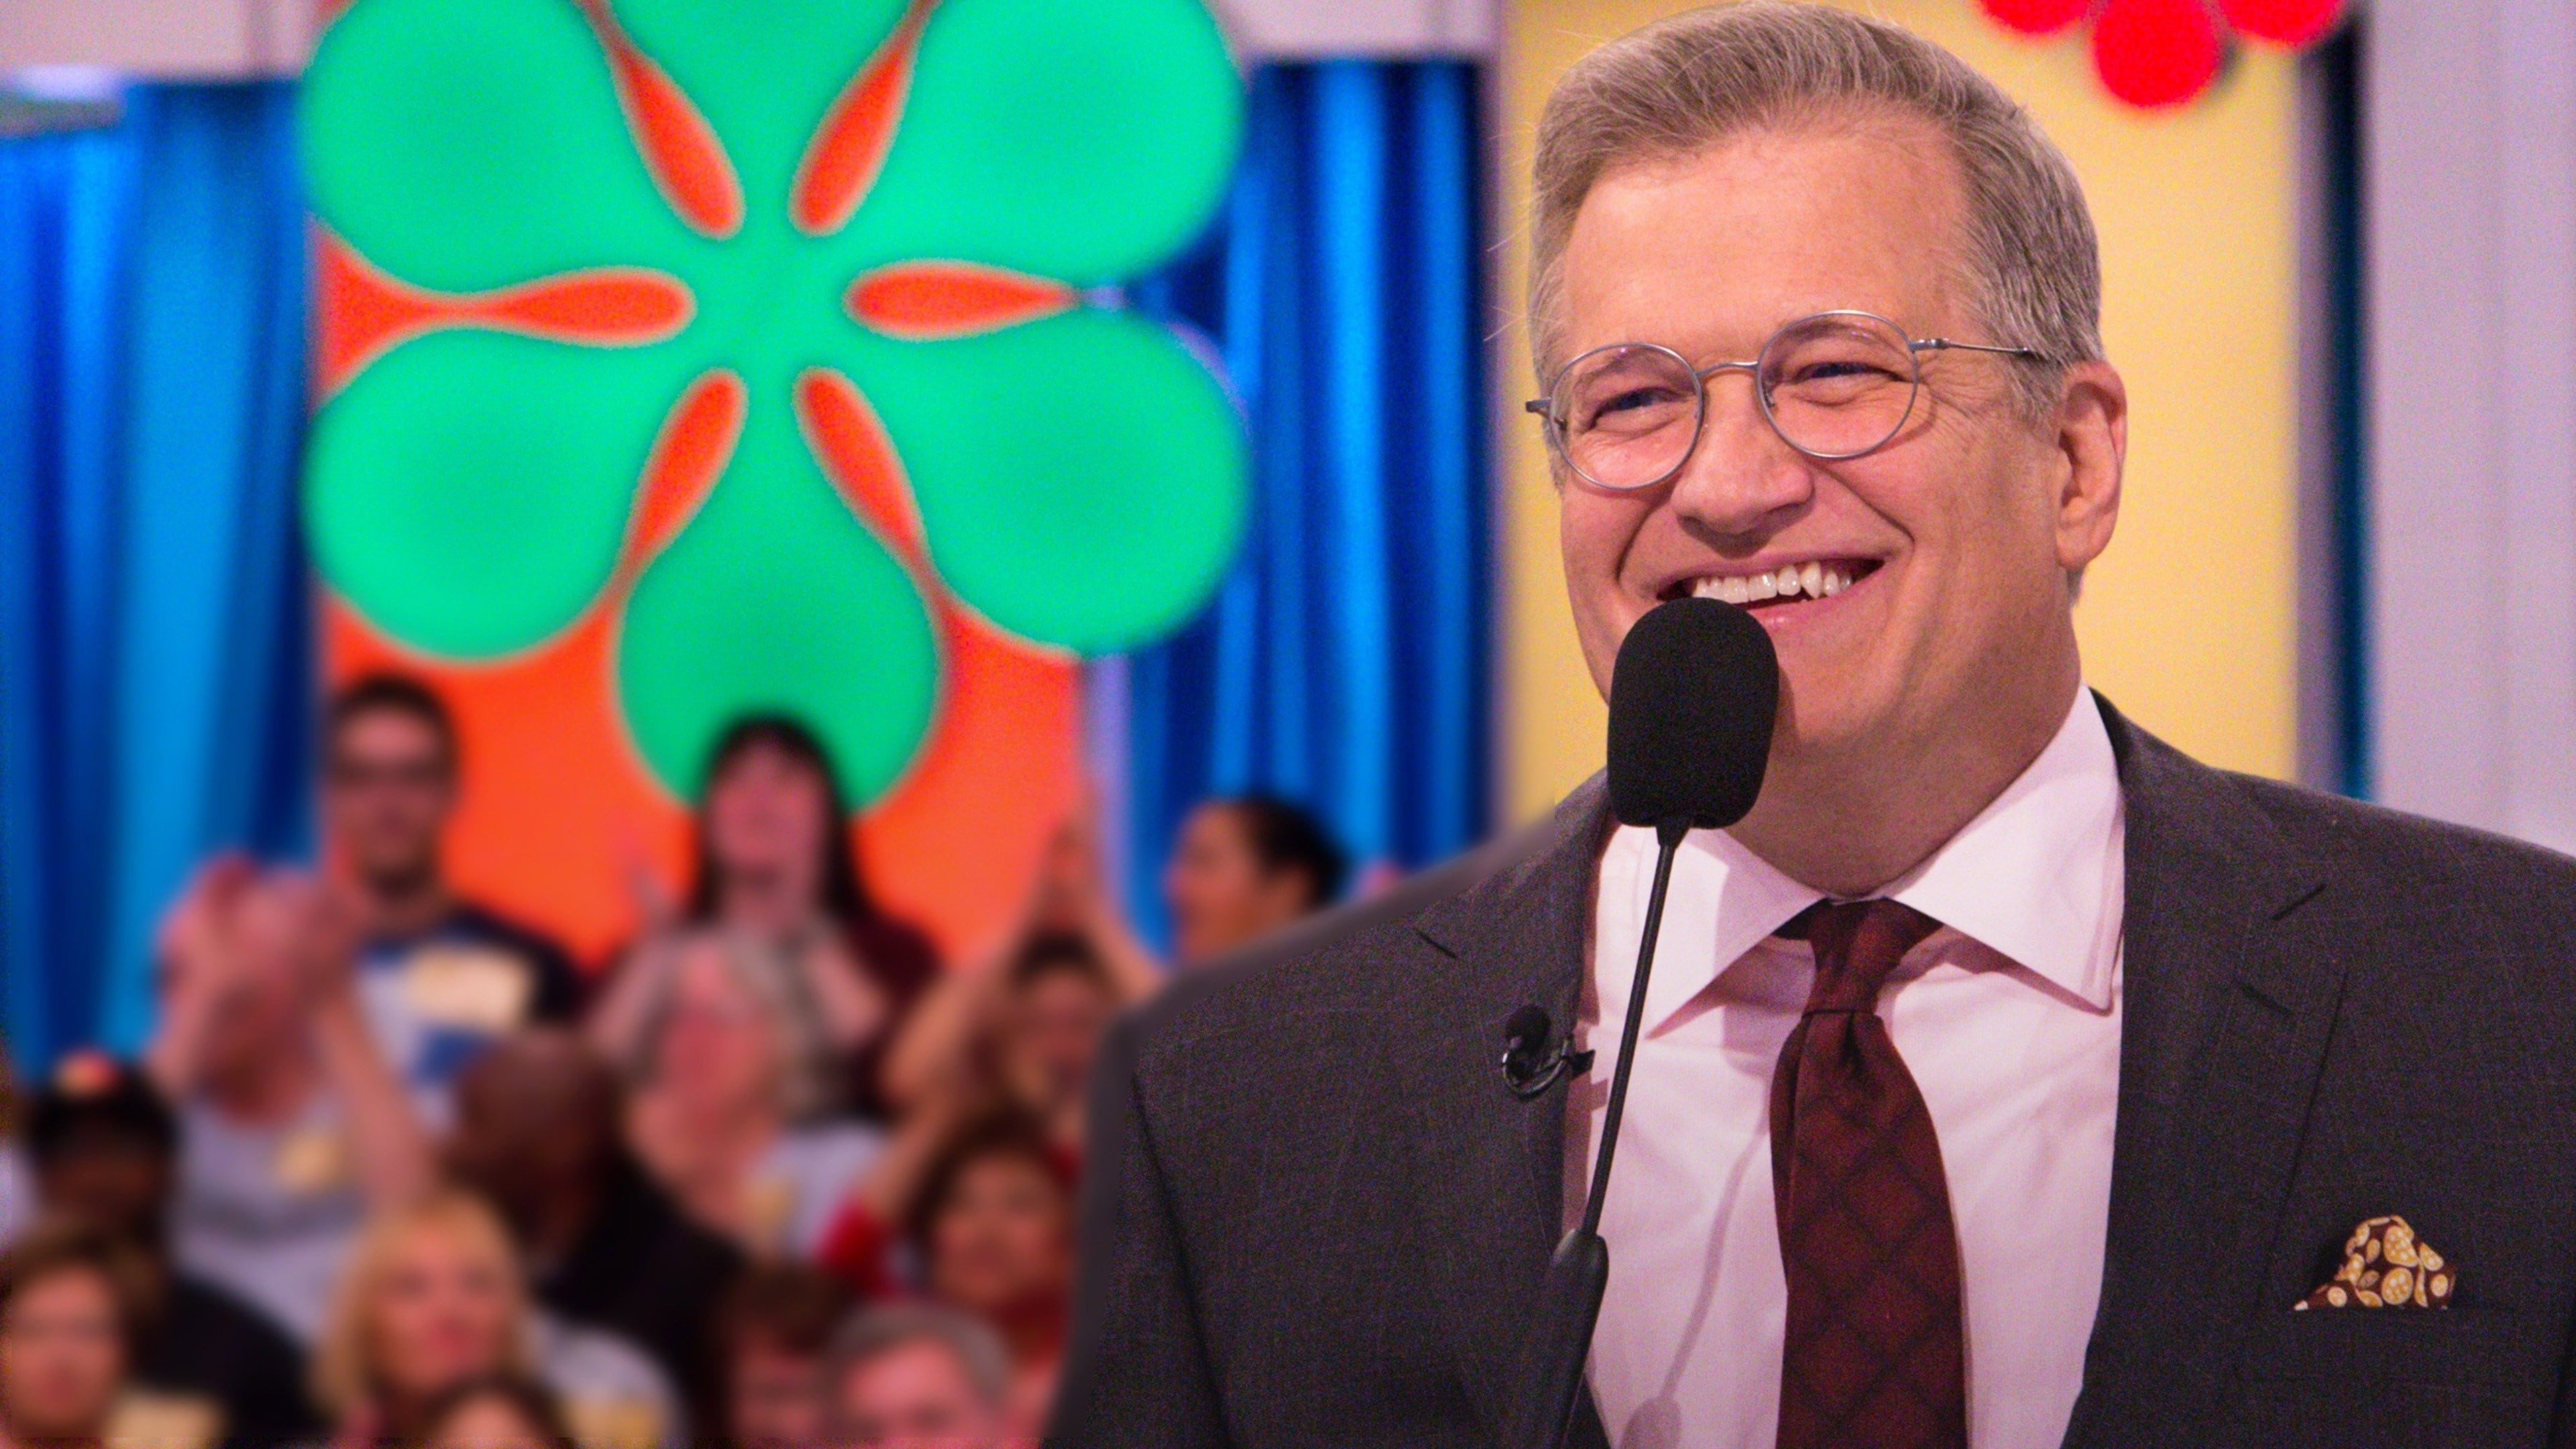 The Price Is Right - Season 3 Episode 58 : The Price Is Right Season 3 Episode 58